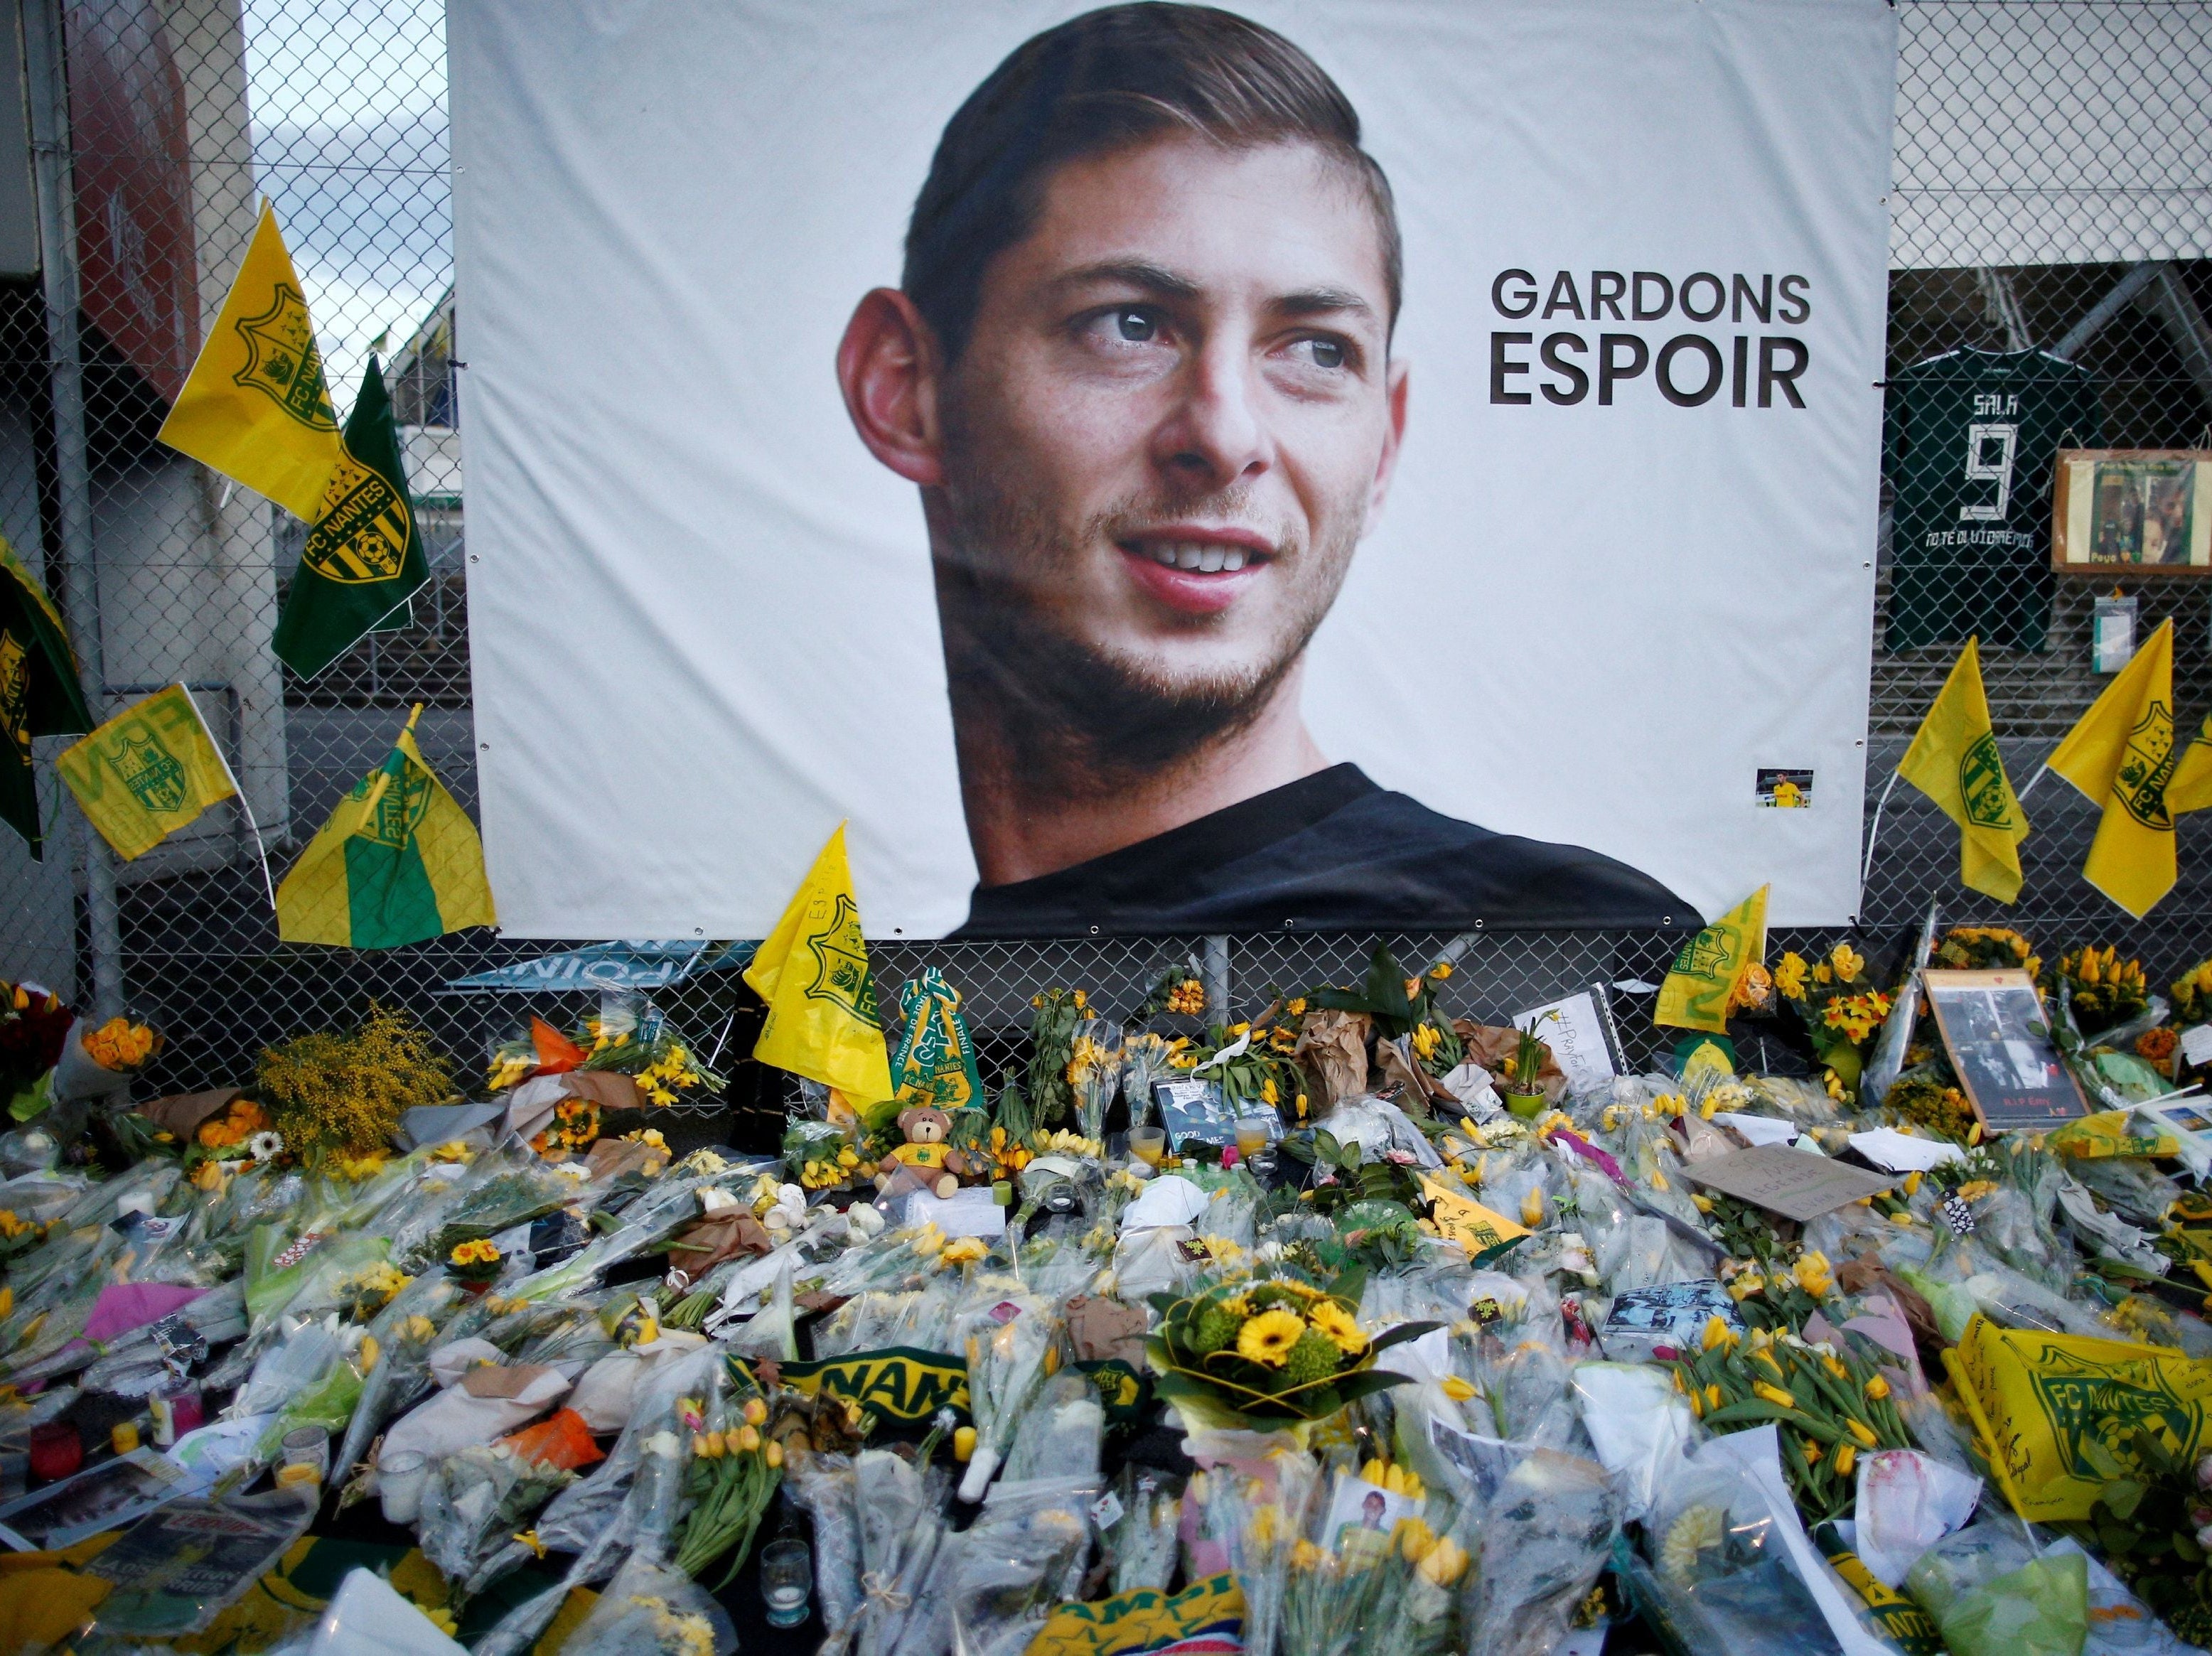 Tributes left outside the Stade de la Beaujoire in Nantes, France for the former Nantes FC and Ligue One player